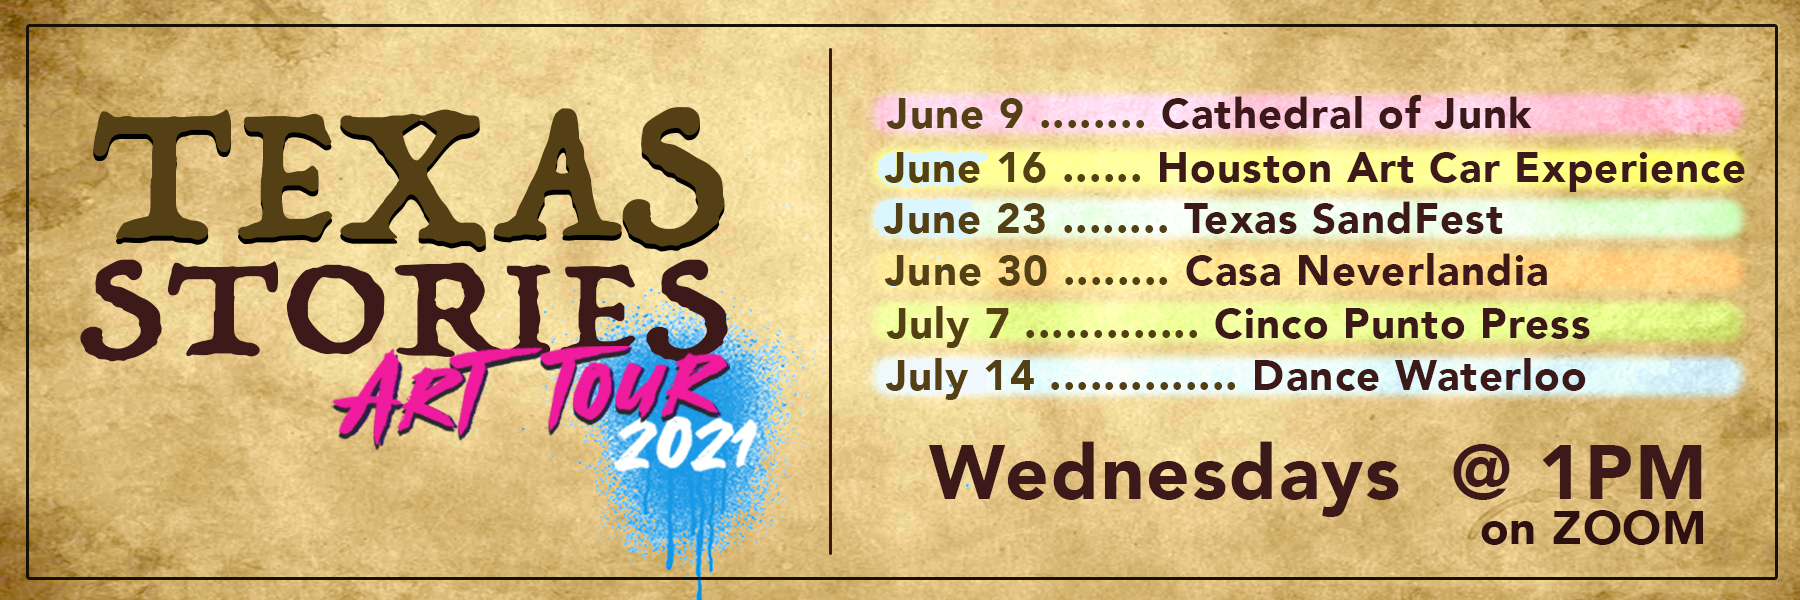 Texas Stories Art Tour 2021. June 9th, Cathedral of Junk; June 16th, Houston Art Car Experience; June 23rd, Texas SandFest; June 30th, Casa Neverlandia; July 7th, Cinco Punto Press; July 14th, Dance Waterloo. Join us Wednesdays @ 1pm on Zoom.